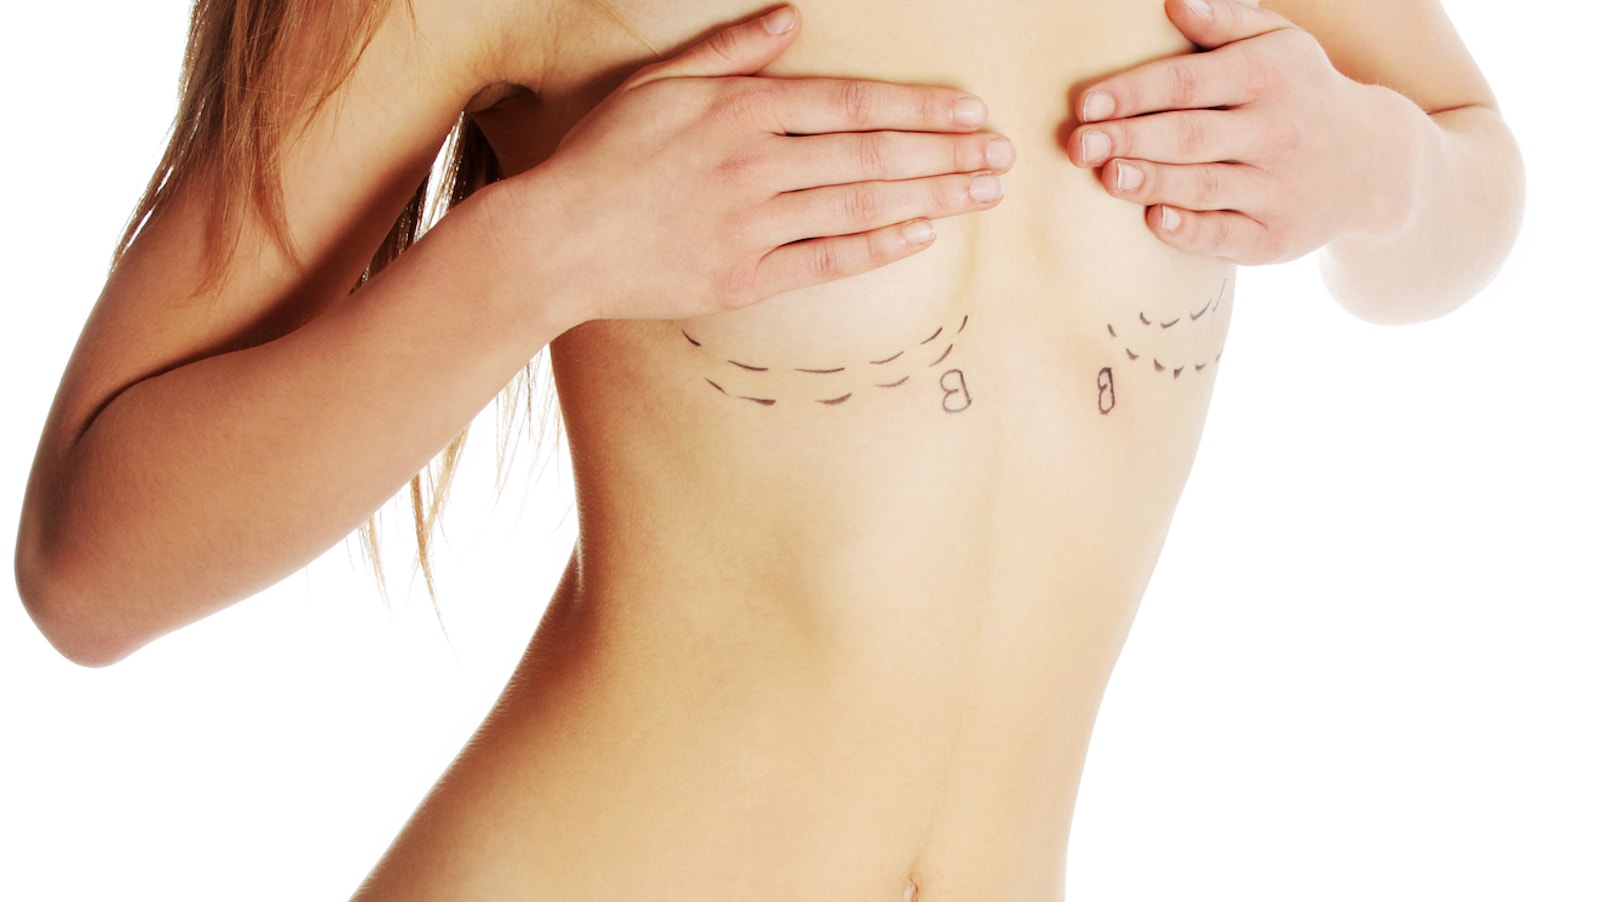 How to do a Breast Augmentation For Thin, Athletic Women